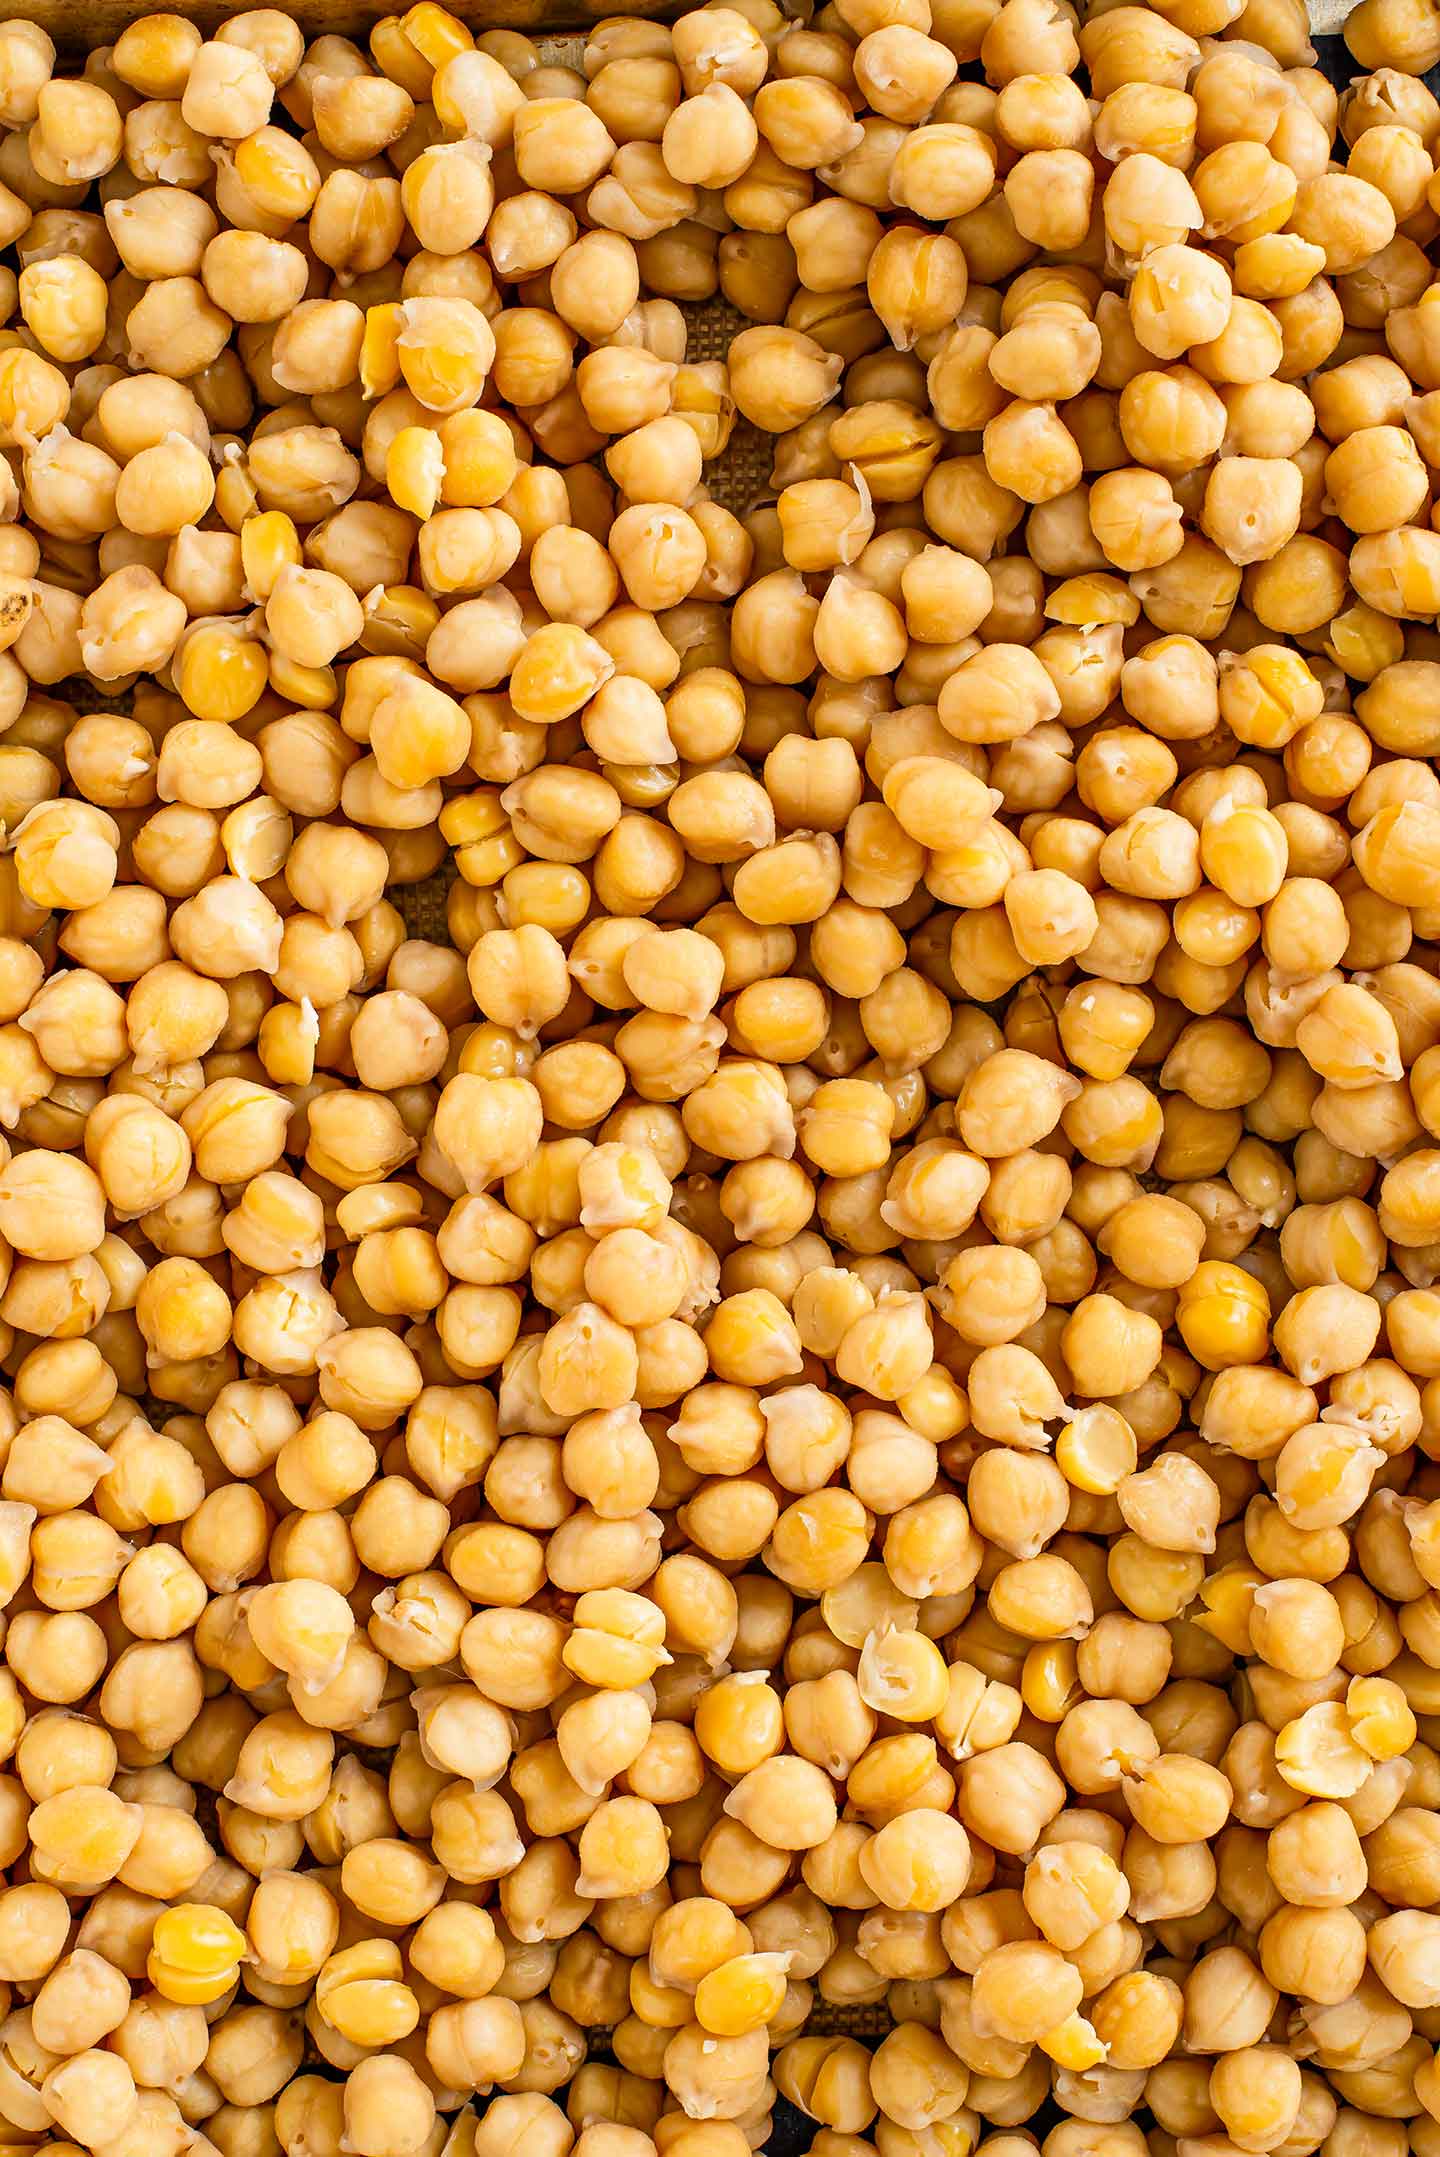 Top down view of cooked chickpeas spread on a baking sheet, filling the image.